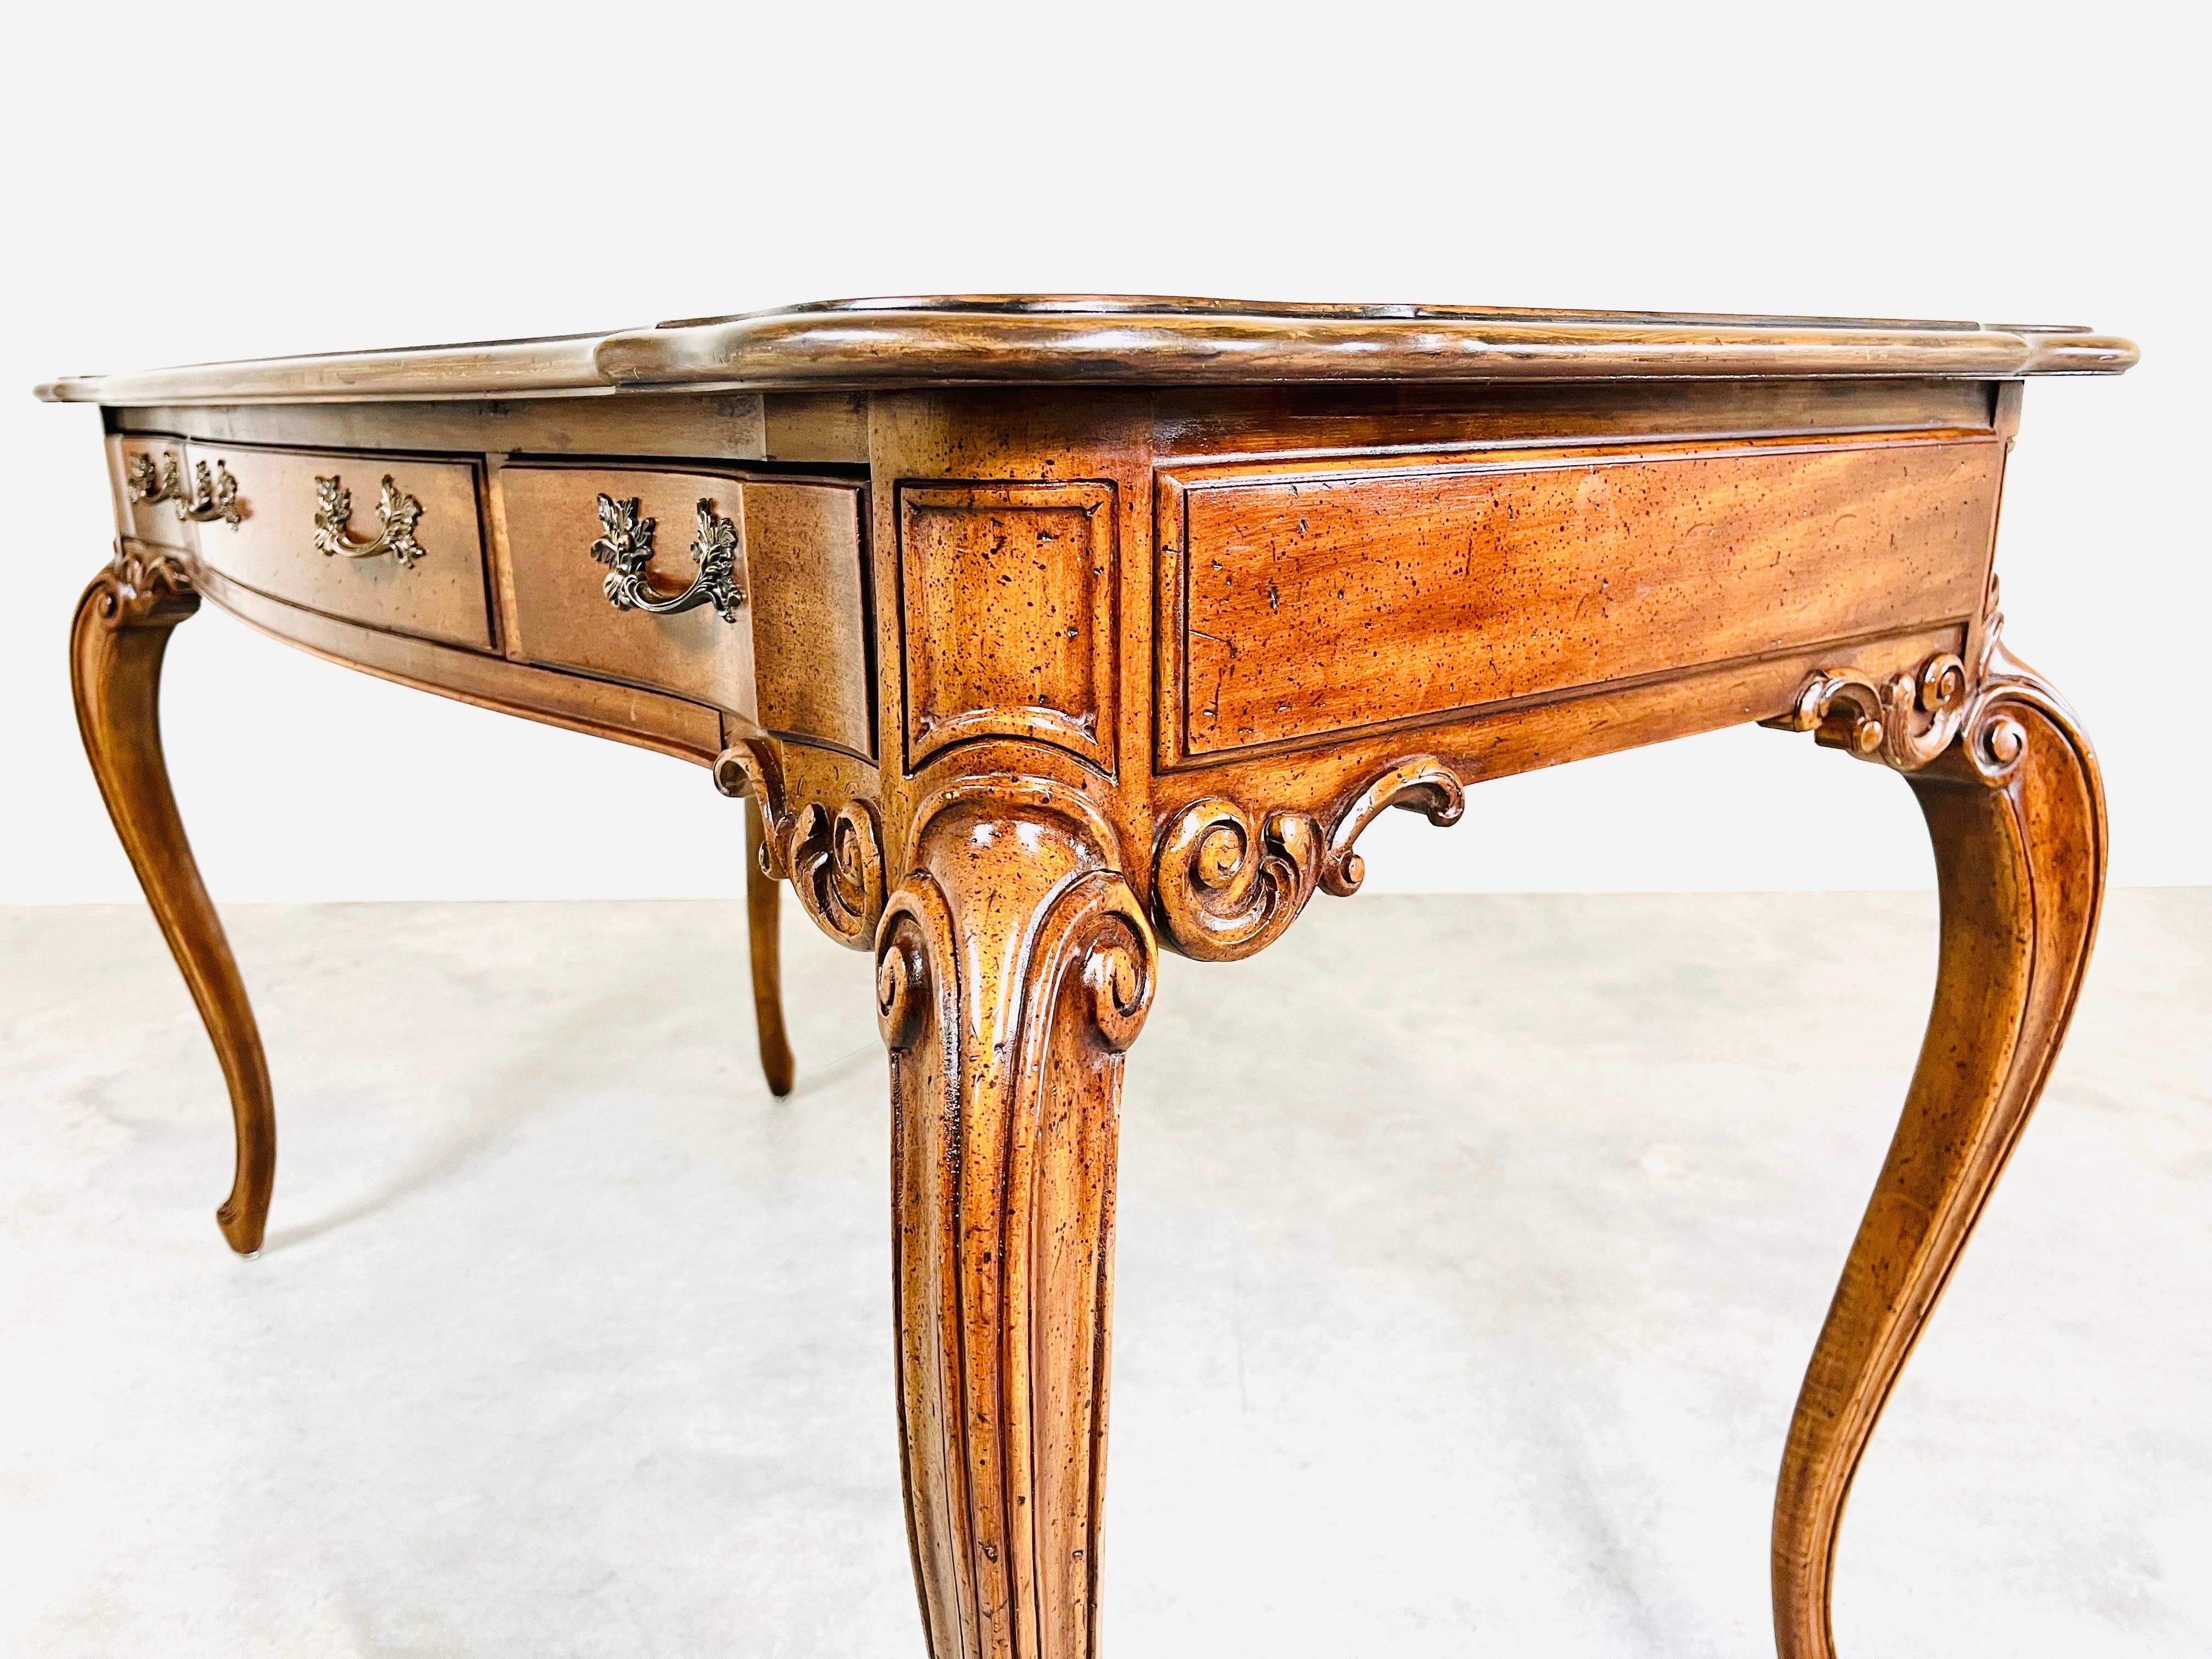 20th Century Baker Louis XV Style 3-Drawer Parquetry Writing Desk or Table in Walnut